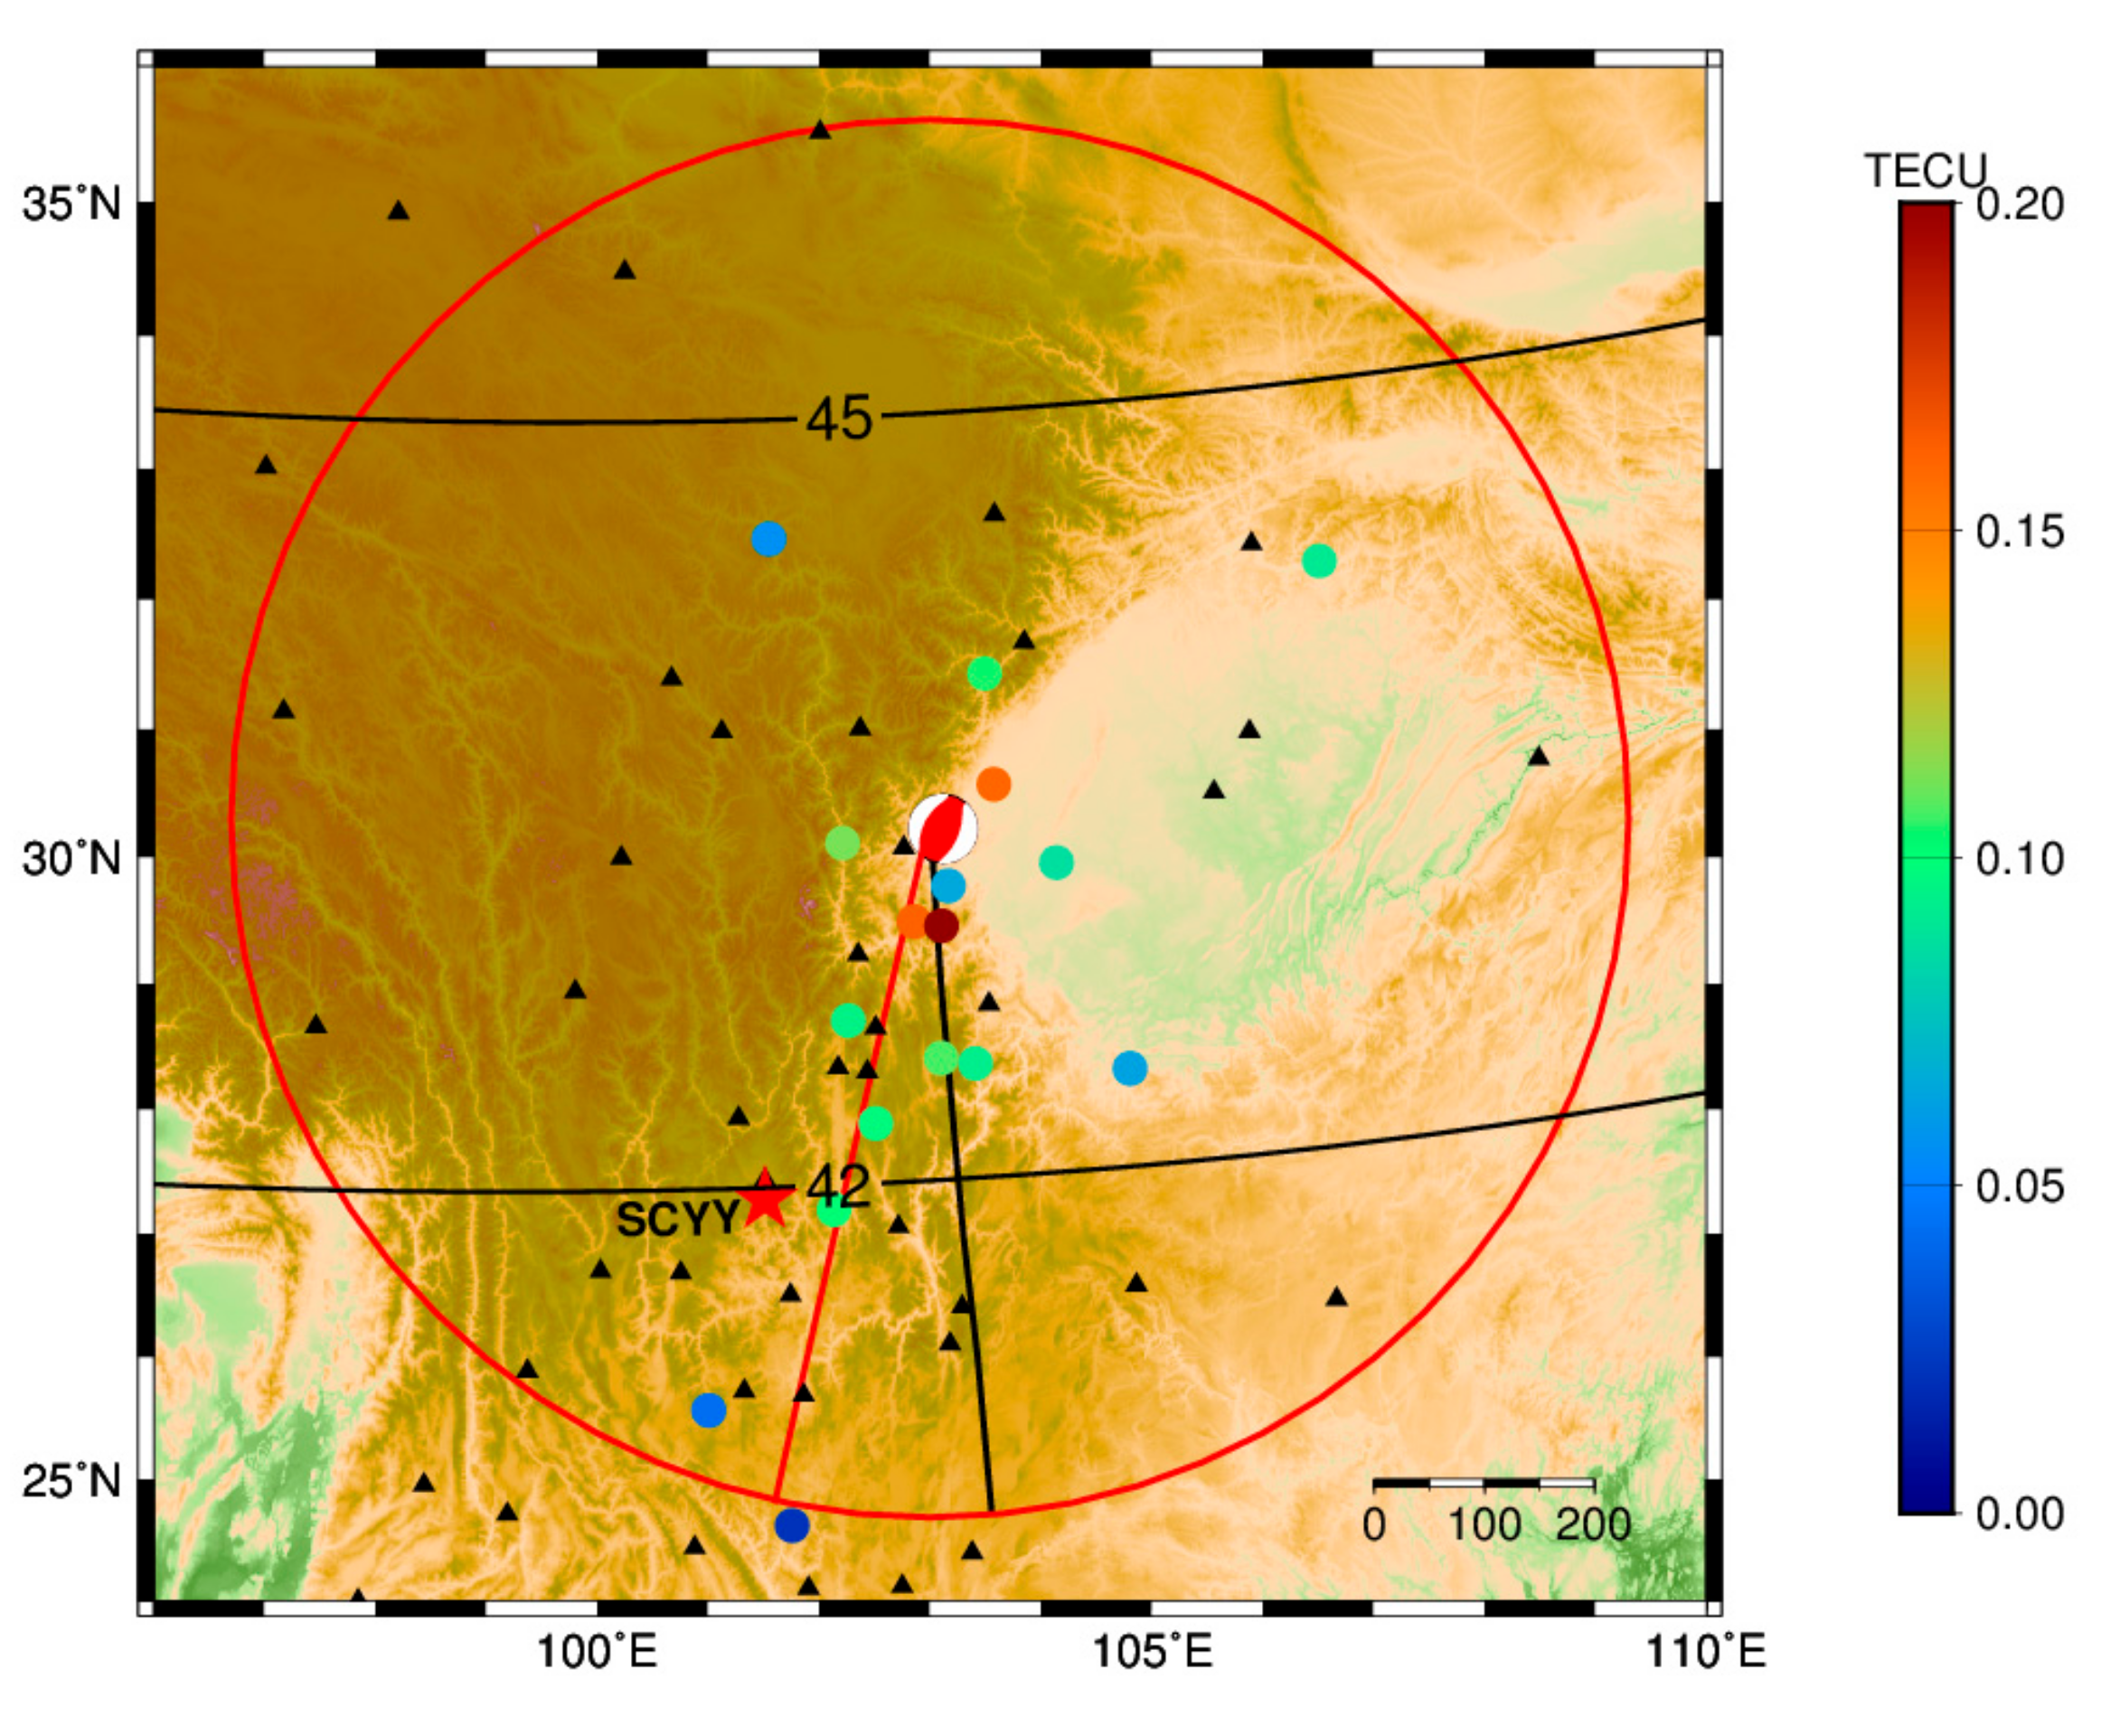 Atmosphere | Free Full-Text | Pre-Earthquake and Coseismic Ionosphere  Disturbances of the Mw 6.6 Lushan Earthquake on 20 April 2013 Monitored by  CMONOC | HTML